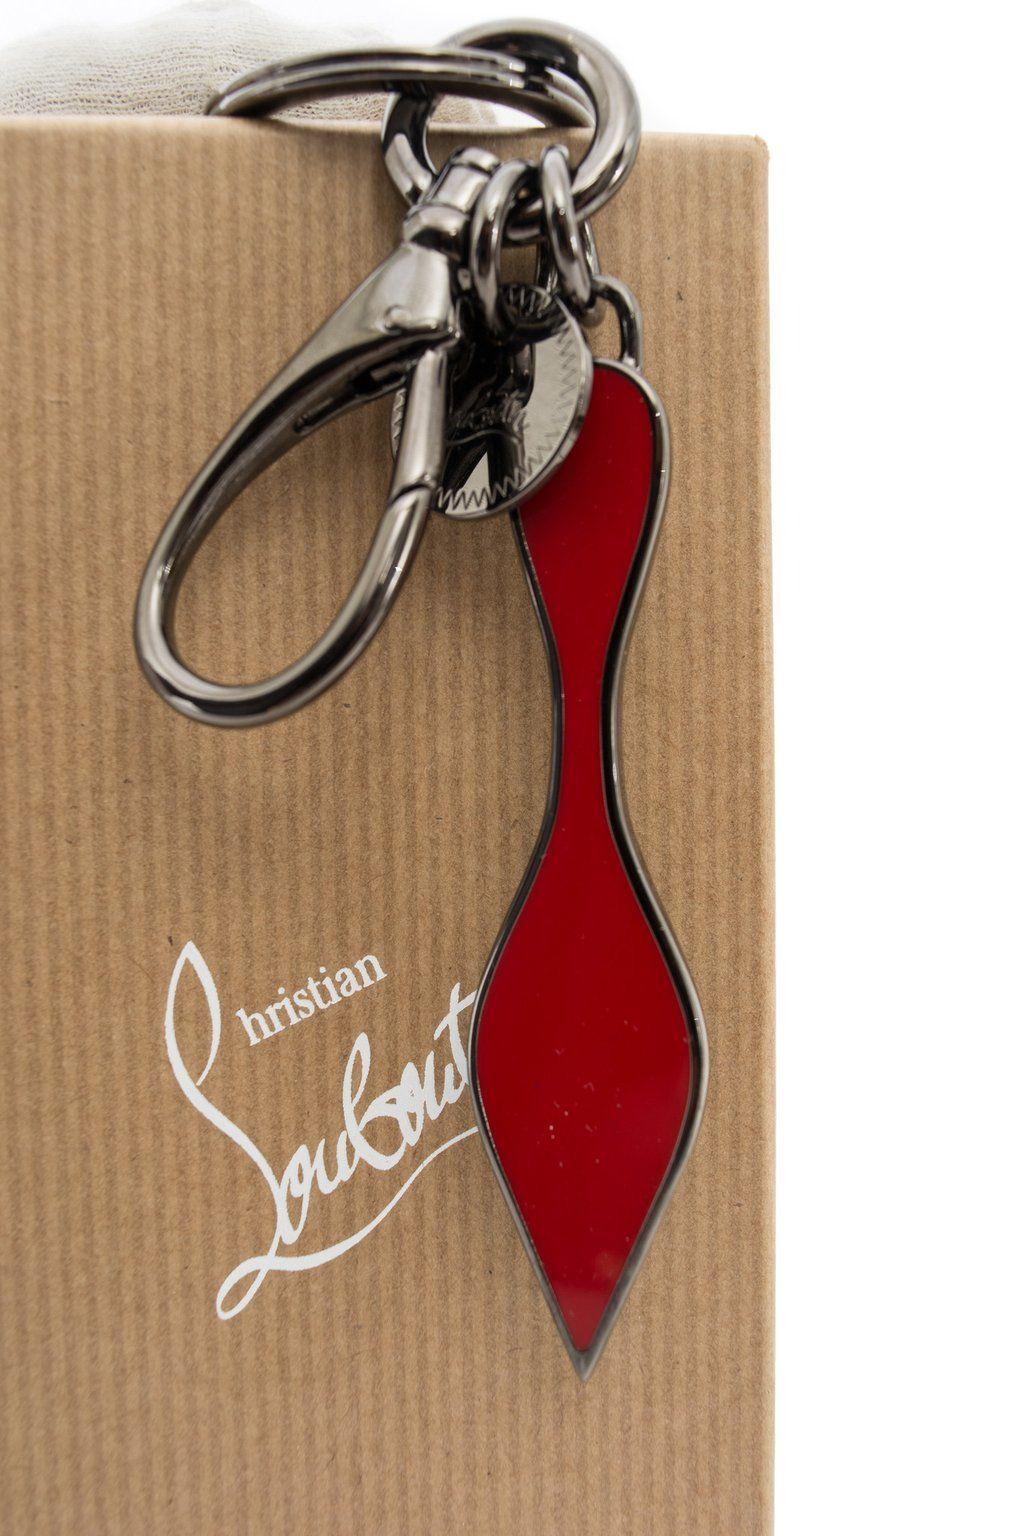 Red Sole Logo - Chrisitian Louboutin Red-Bottom Keychain | Luxury Resale | Vancouver ...